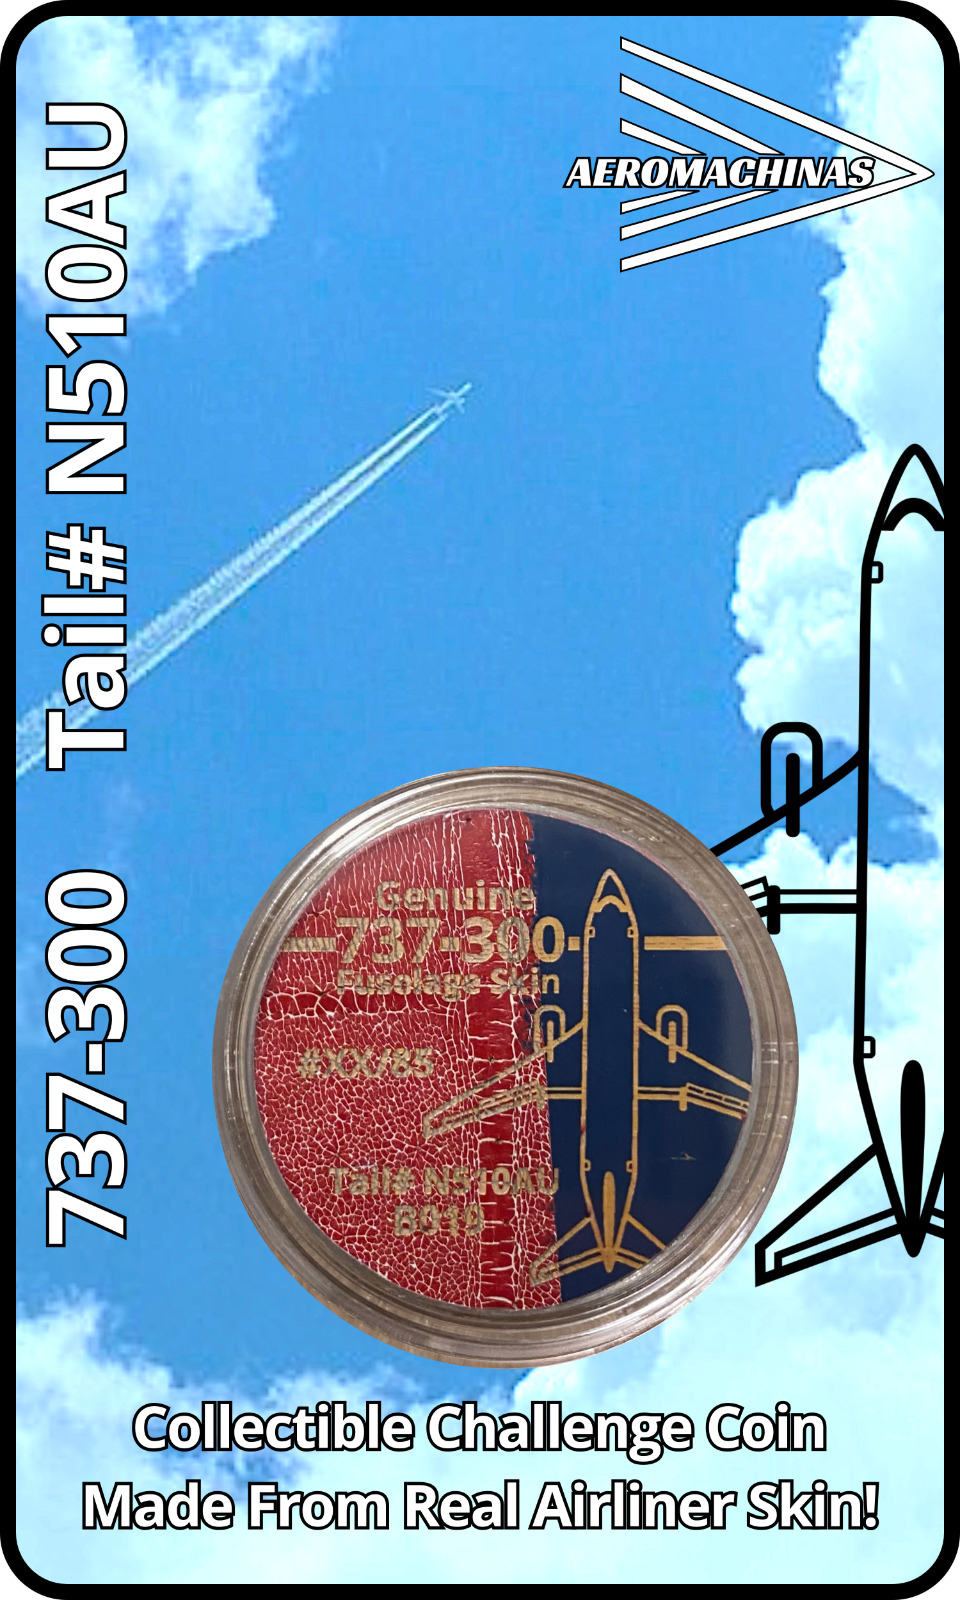 Blue and Red Boeing 737 Aircraft Skin Challenge Coin